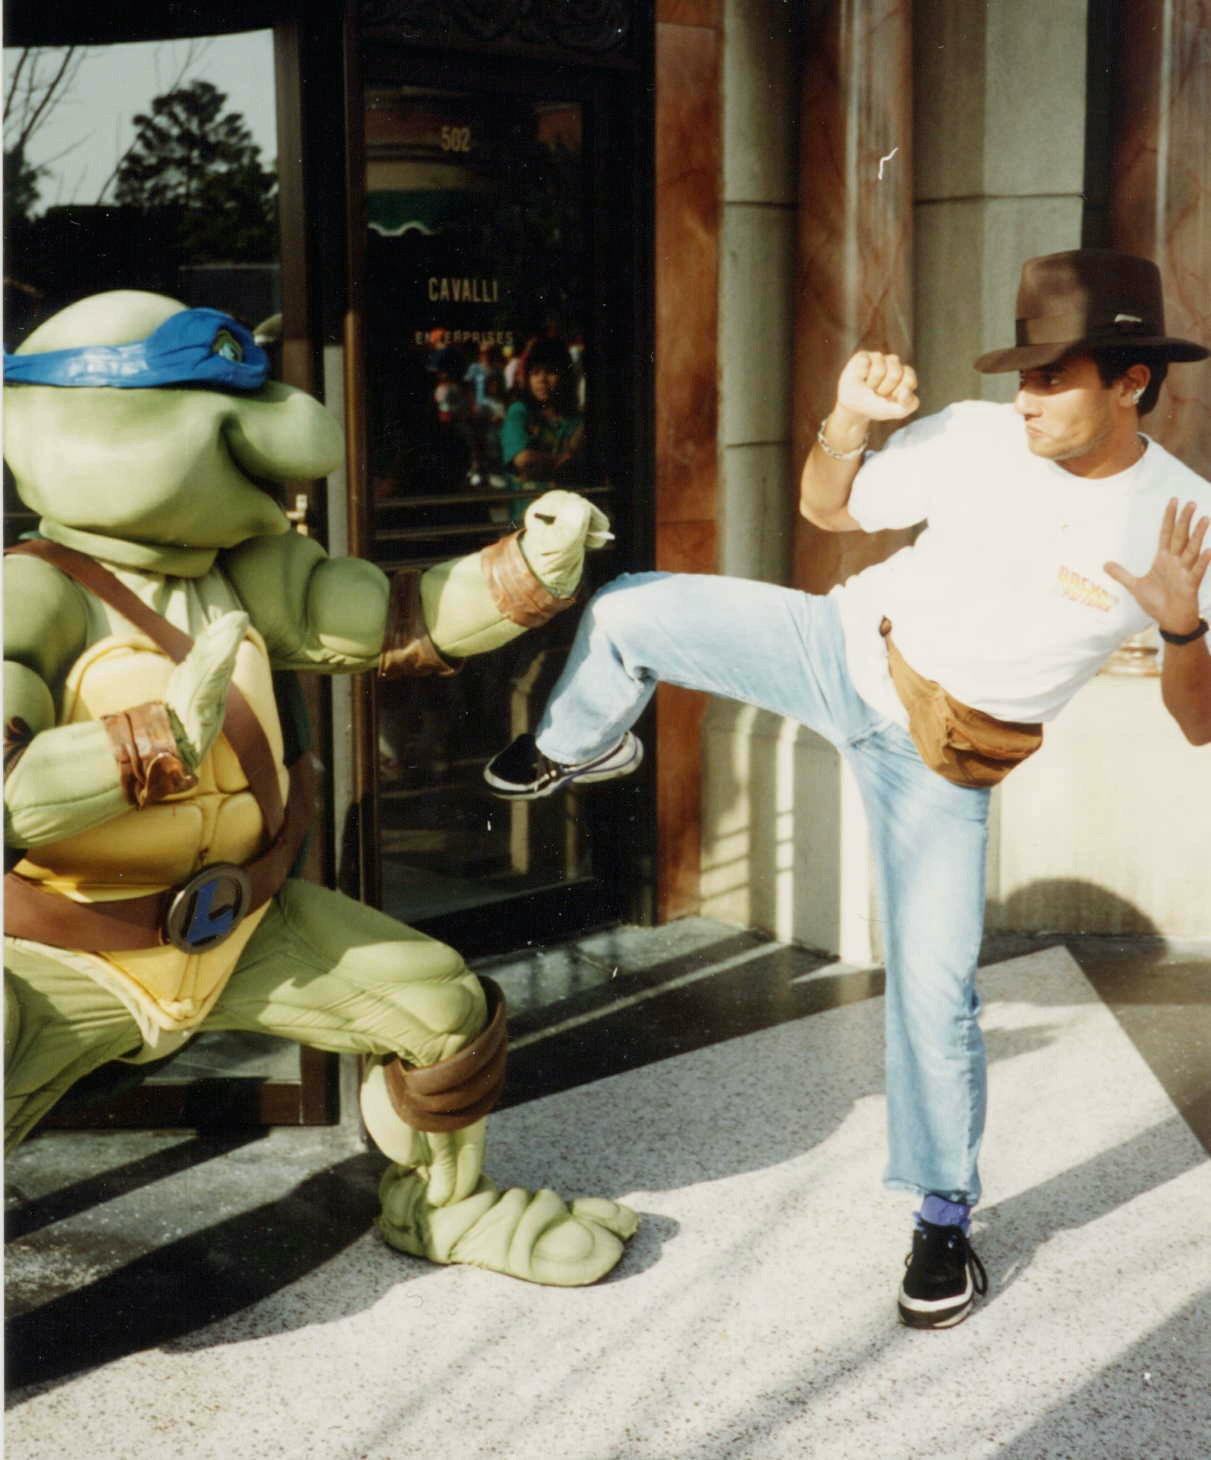 Marc SAEZ and a TURTLE ; - )